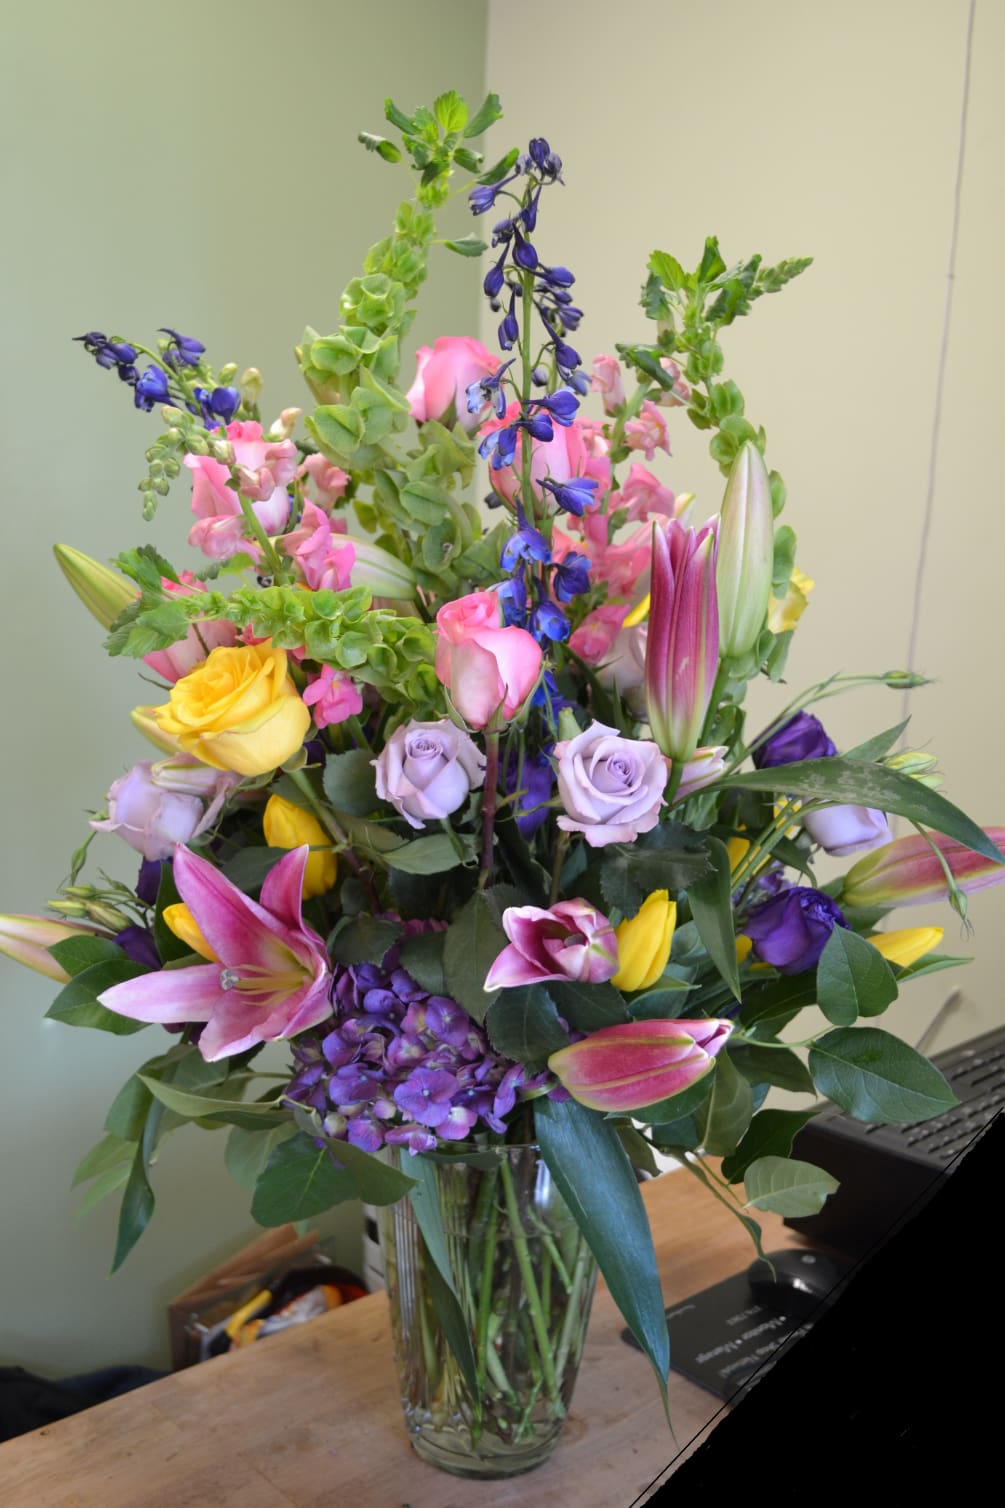 Oriental Lilies, Tulips, Roses, Bells of Ireland, Delphinium, Snapdragons, Hydrengea and more